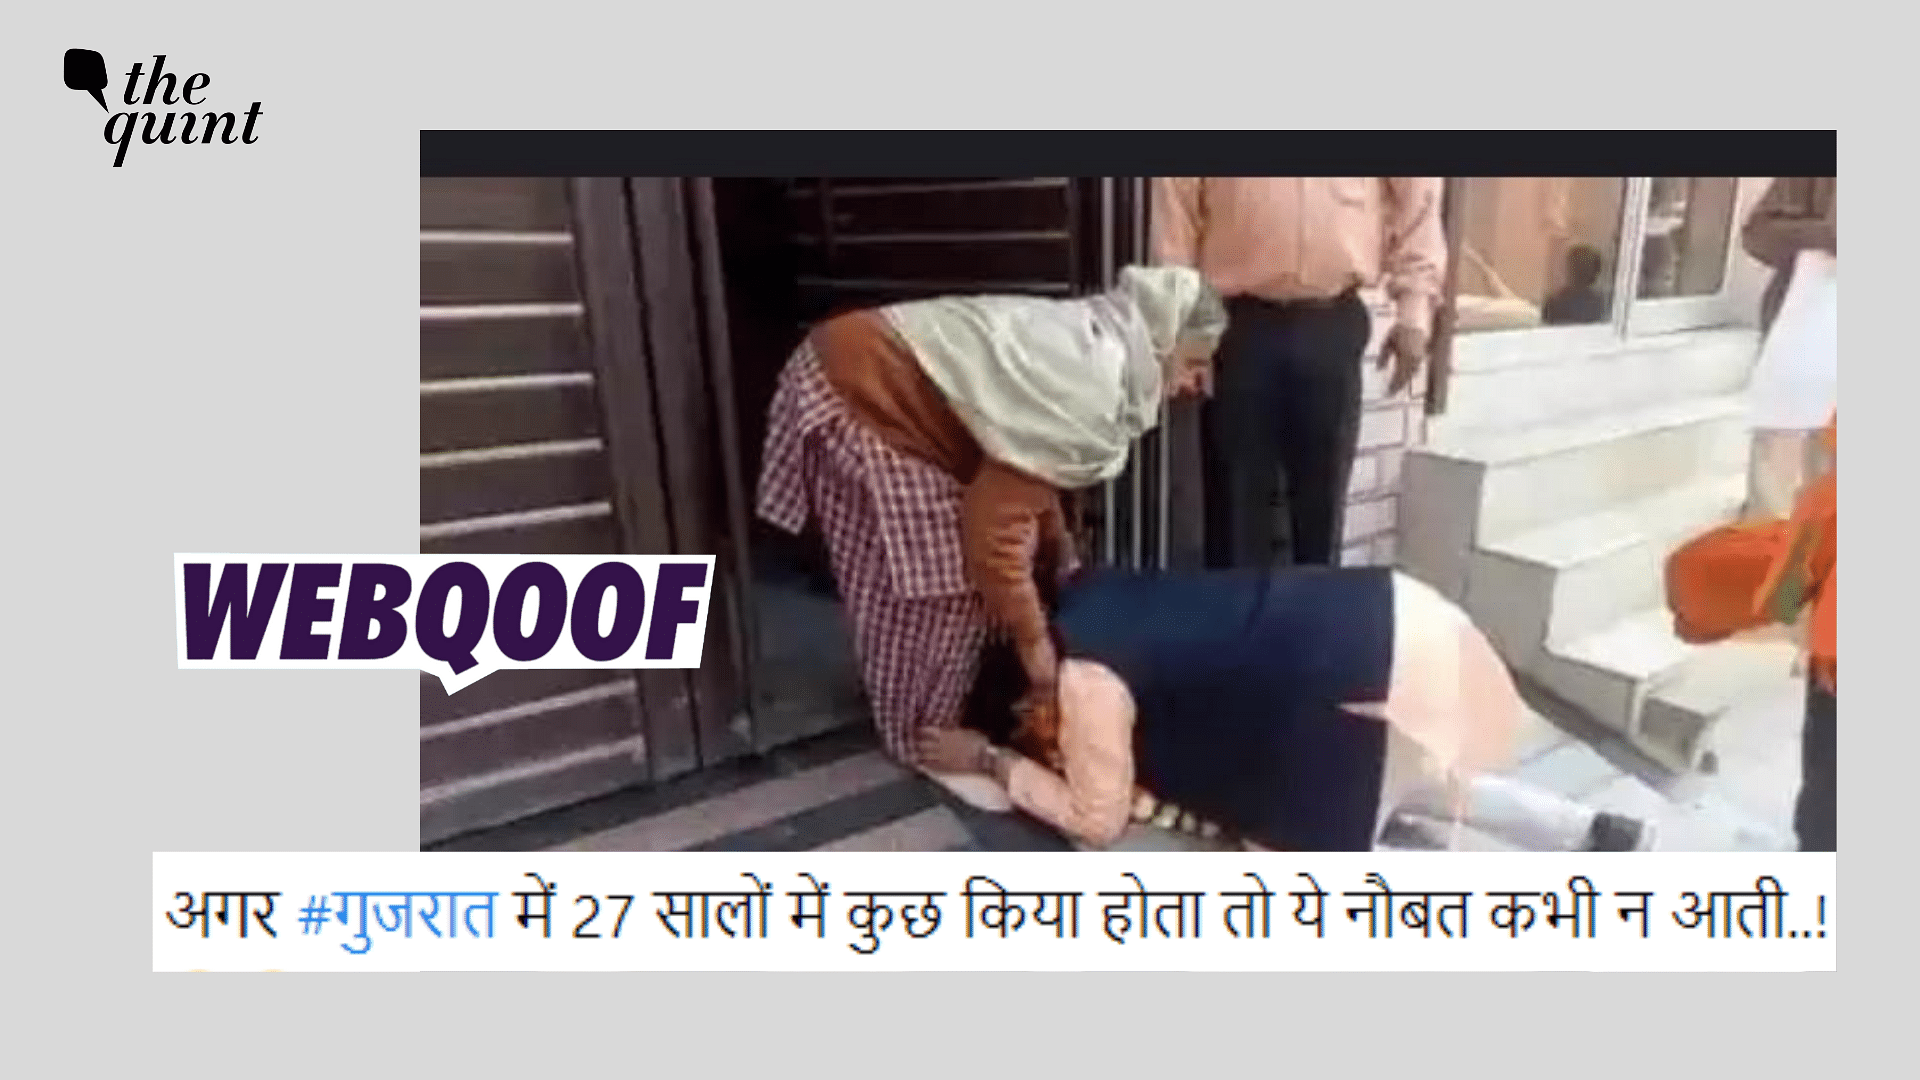 <div class="paragraphs"><p>Fact-Check | An old image showing a person asking for votes by touching the feet of an elderly woman is from Delhi, not Gujarat.</p></div>